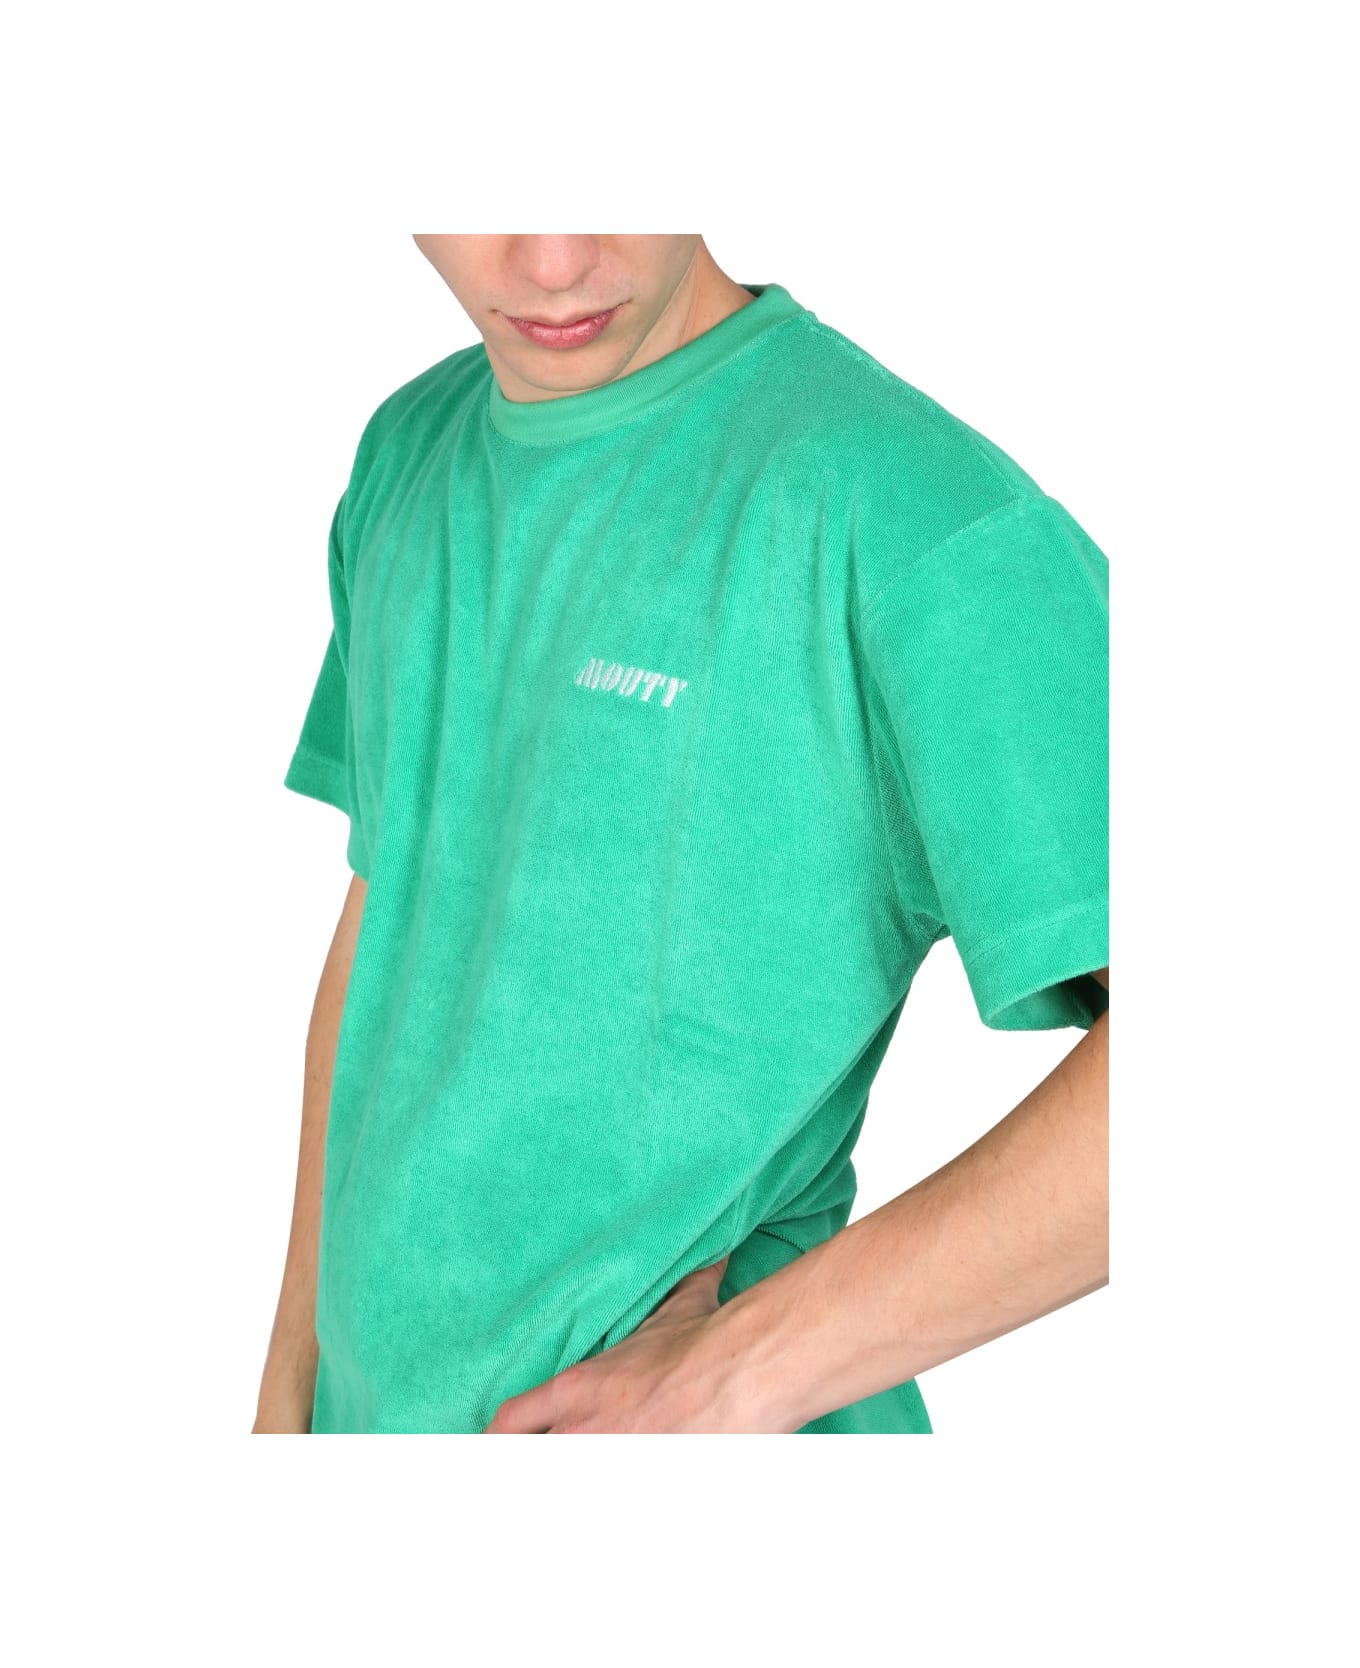 Mouty "terry" T-shirt - GREEN